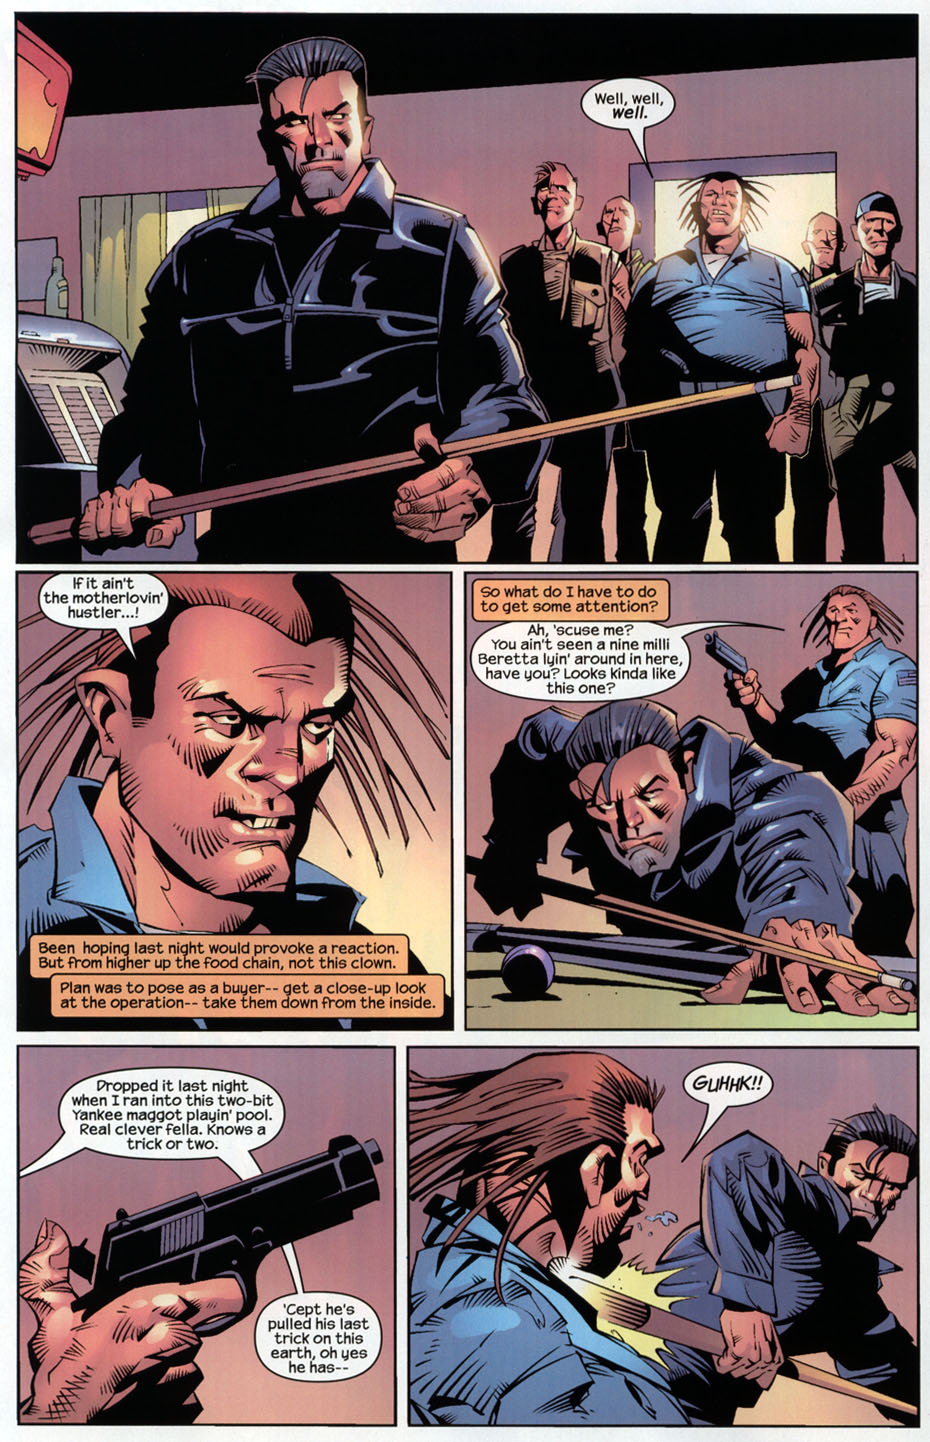 The Punisher (2001) issue 29 - Streets of Laredo #02 - Page 12